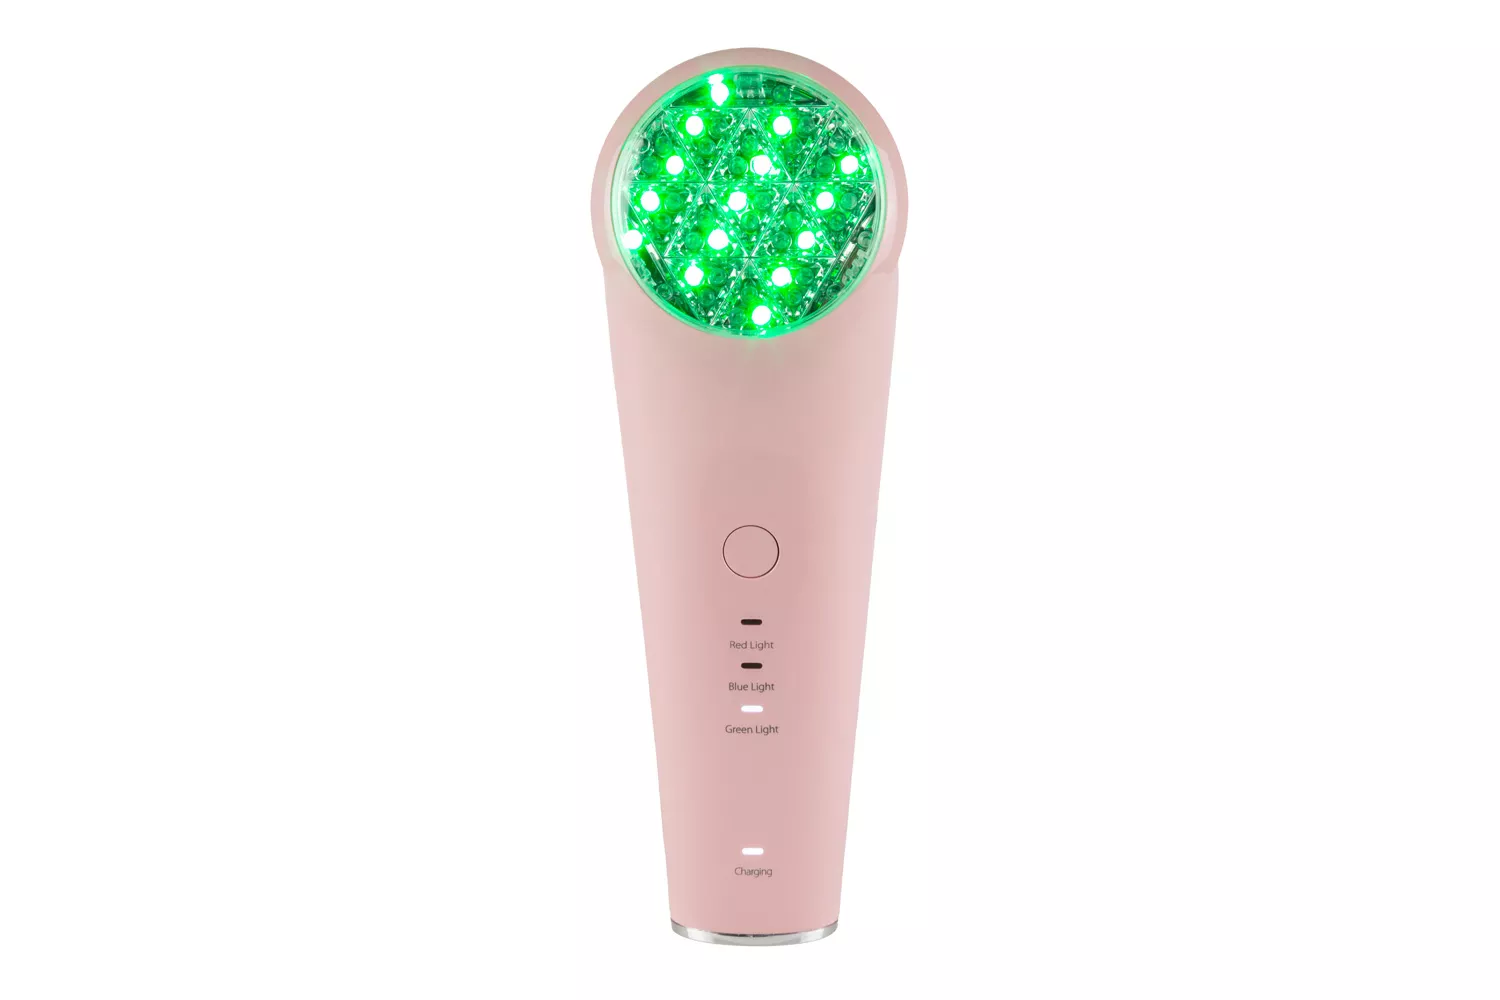 Skin Gym Revilit LED Light Therapy Tool